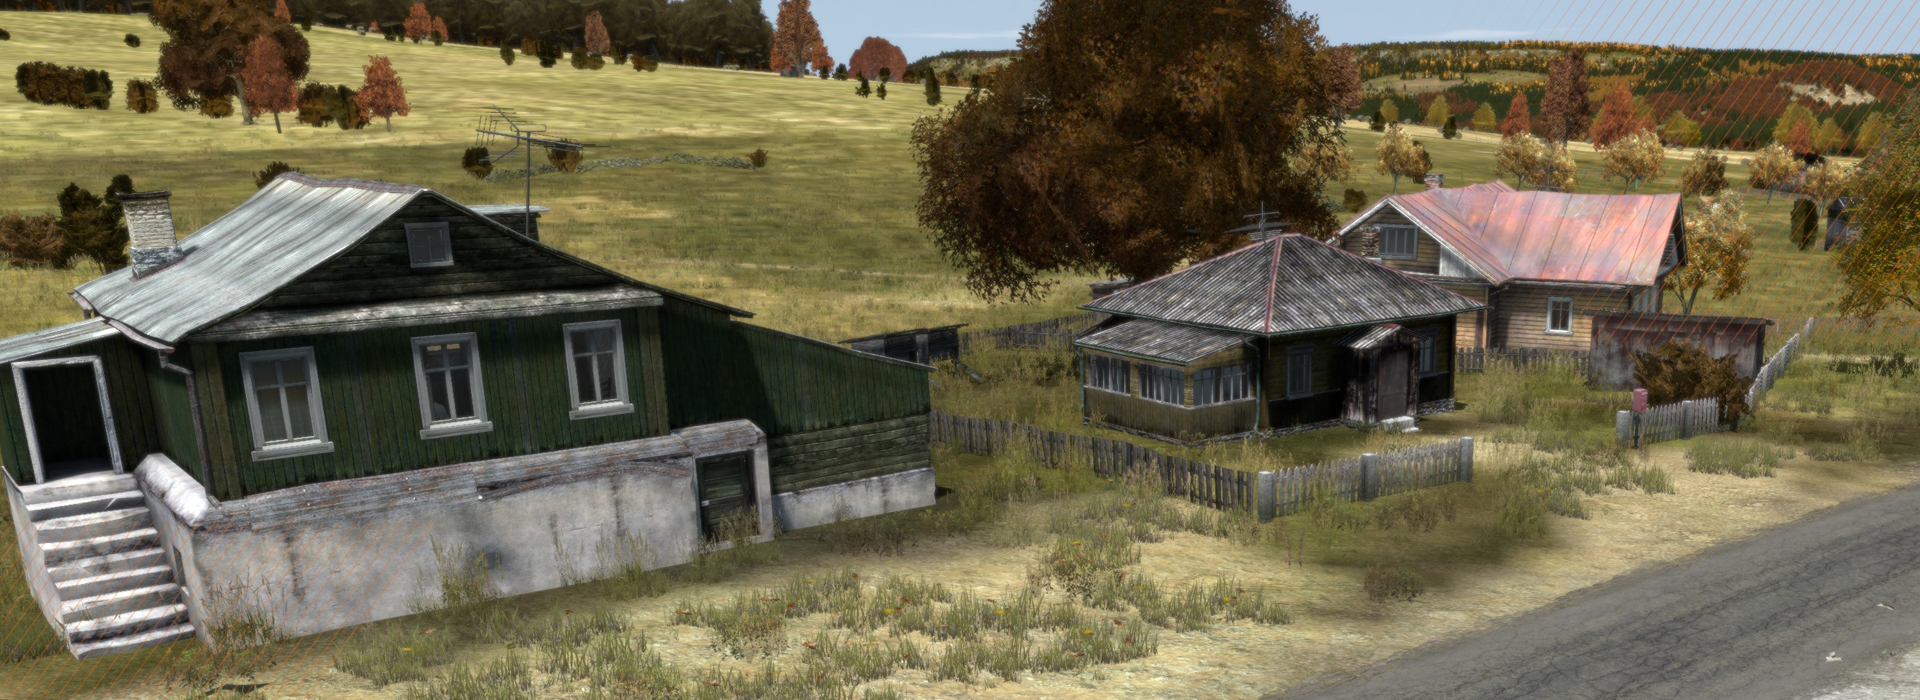 after_the_apocalypse_de_zombifying_dayzs_chernarus_terrain_for_military_training